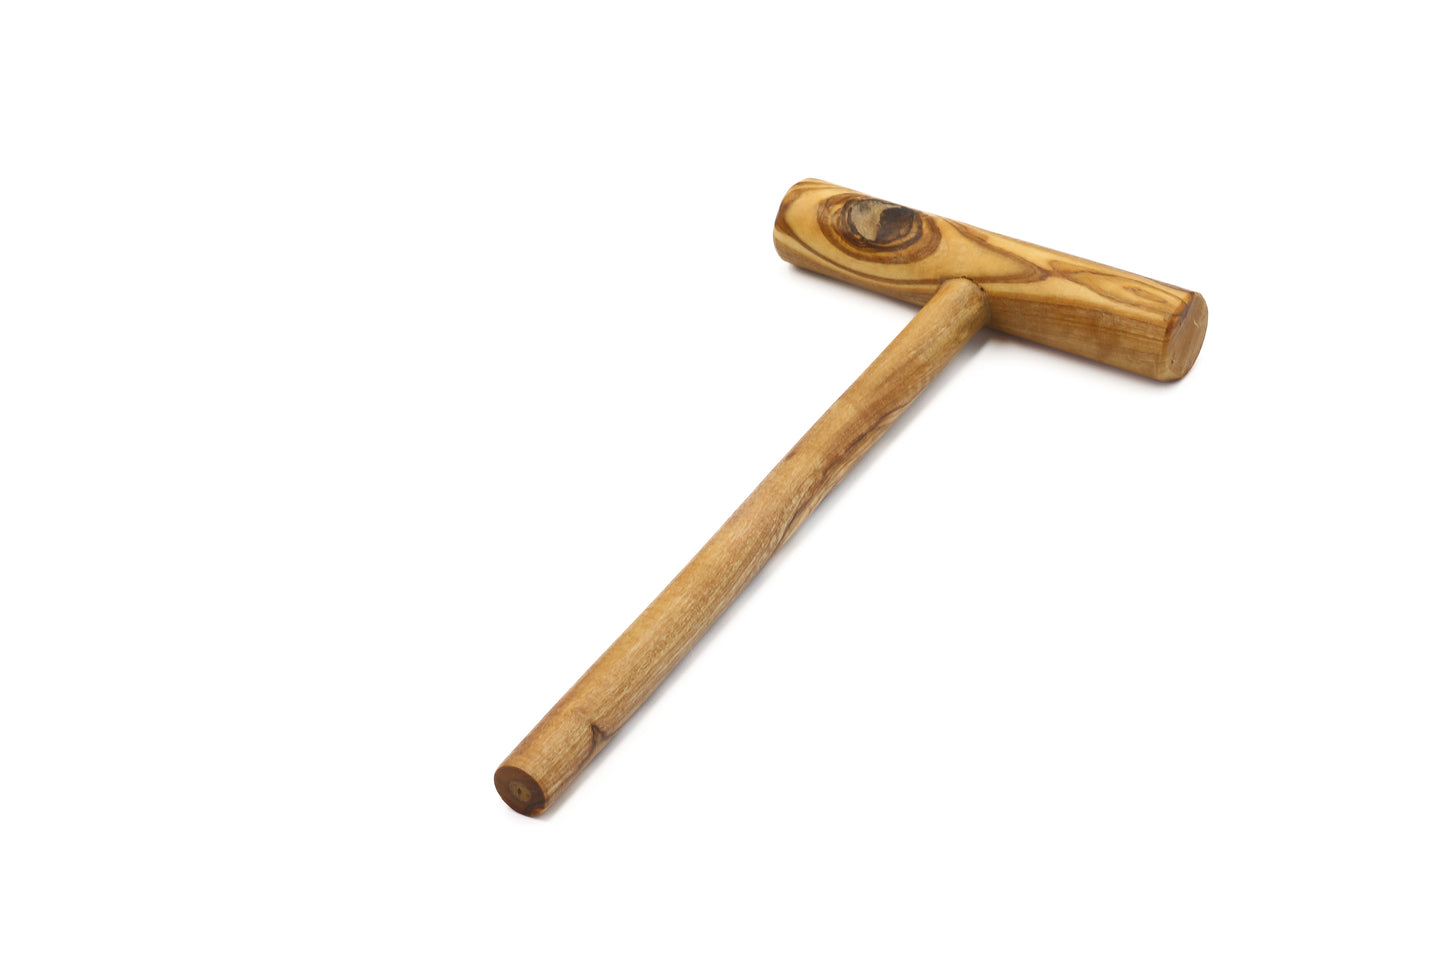 T-shaped rounded crêpe spreader made from olive wood